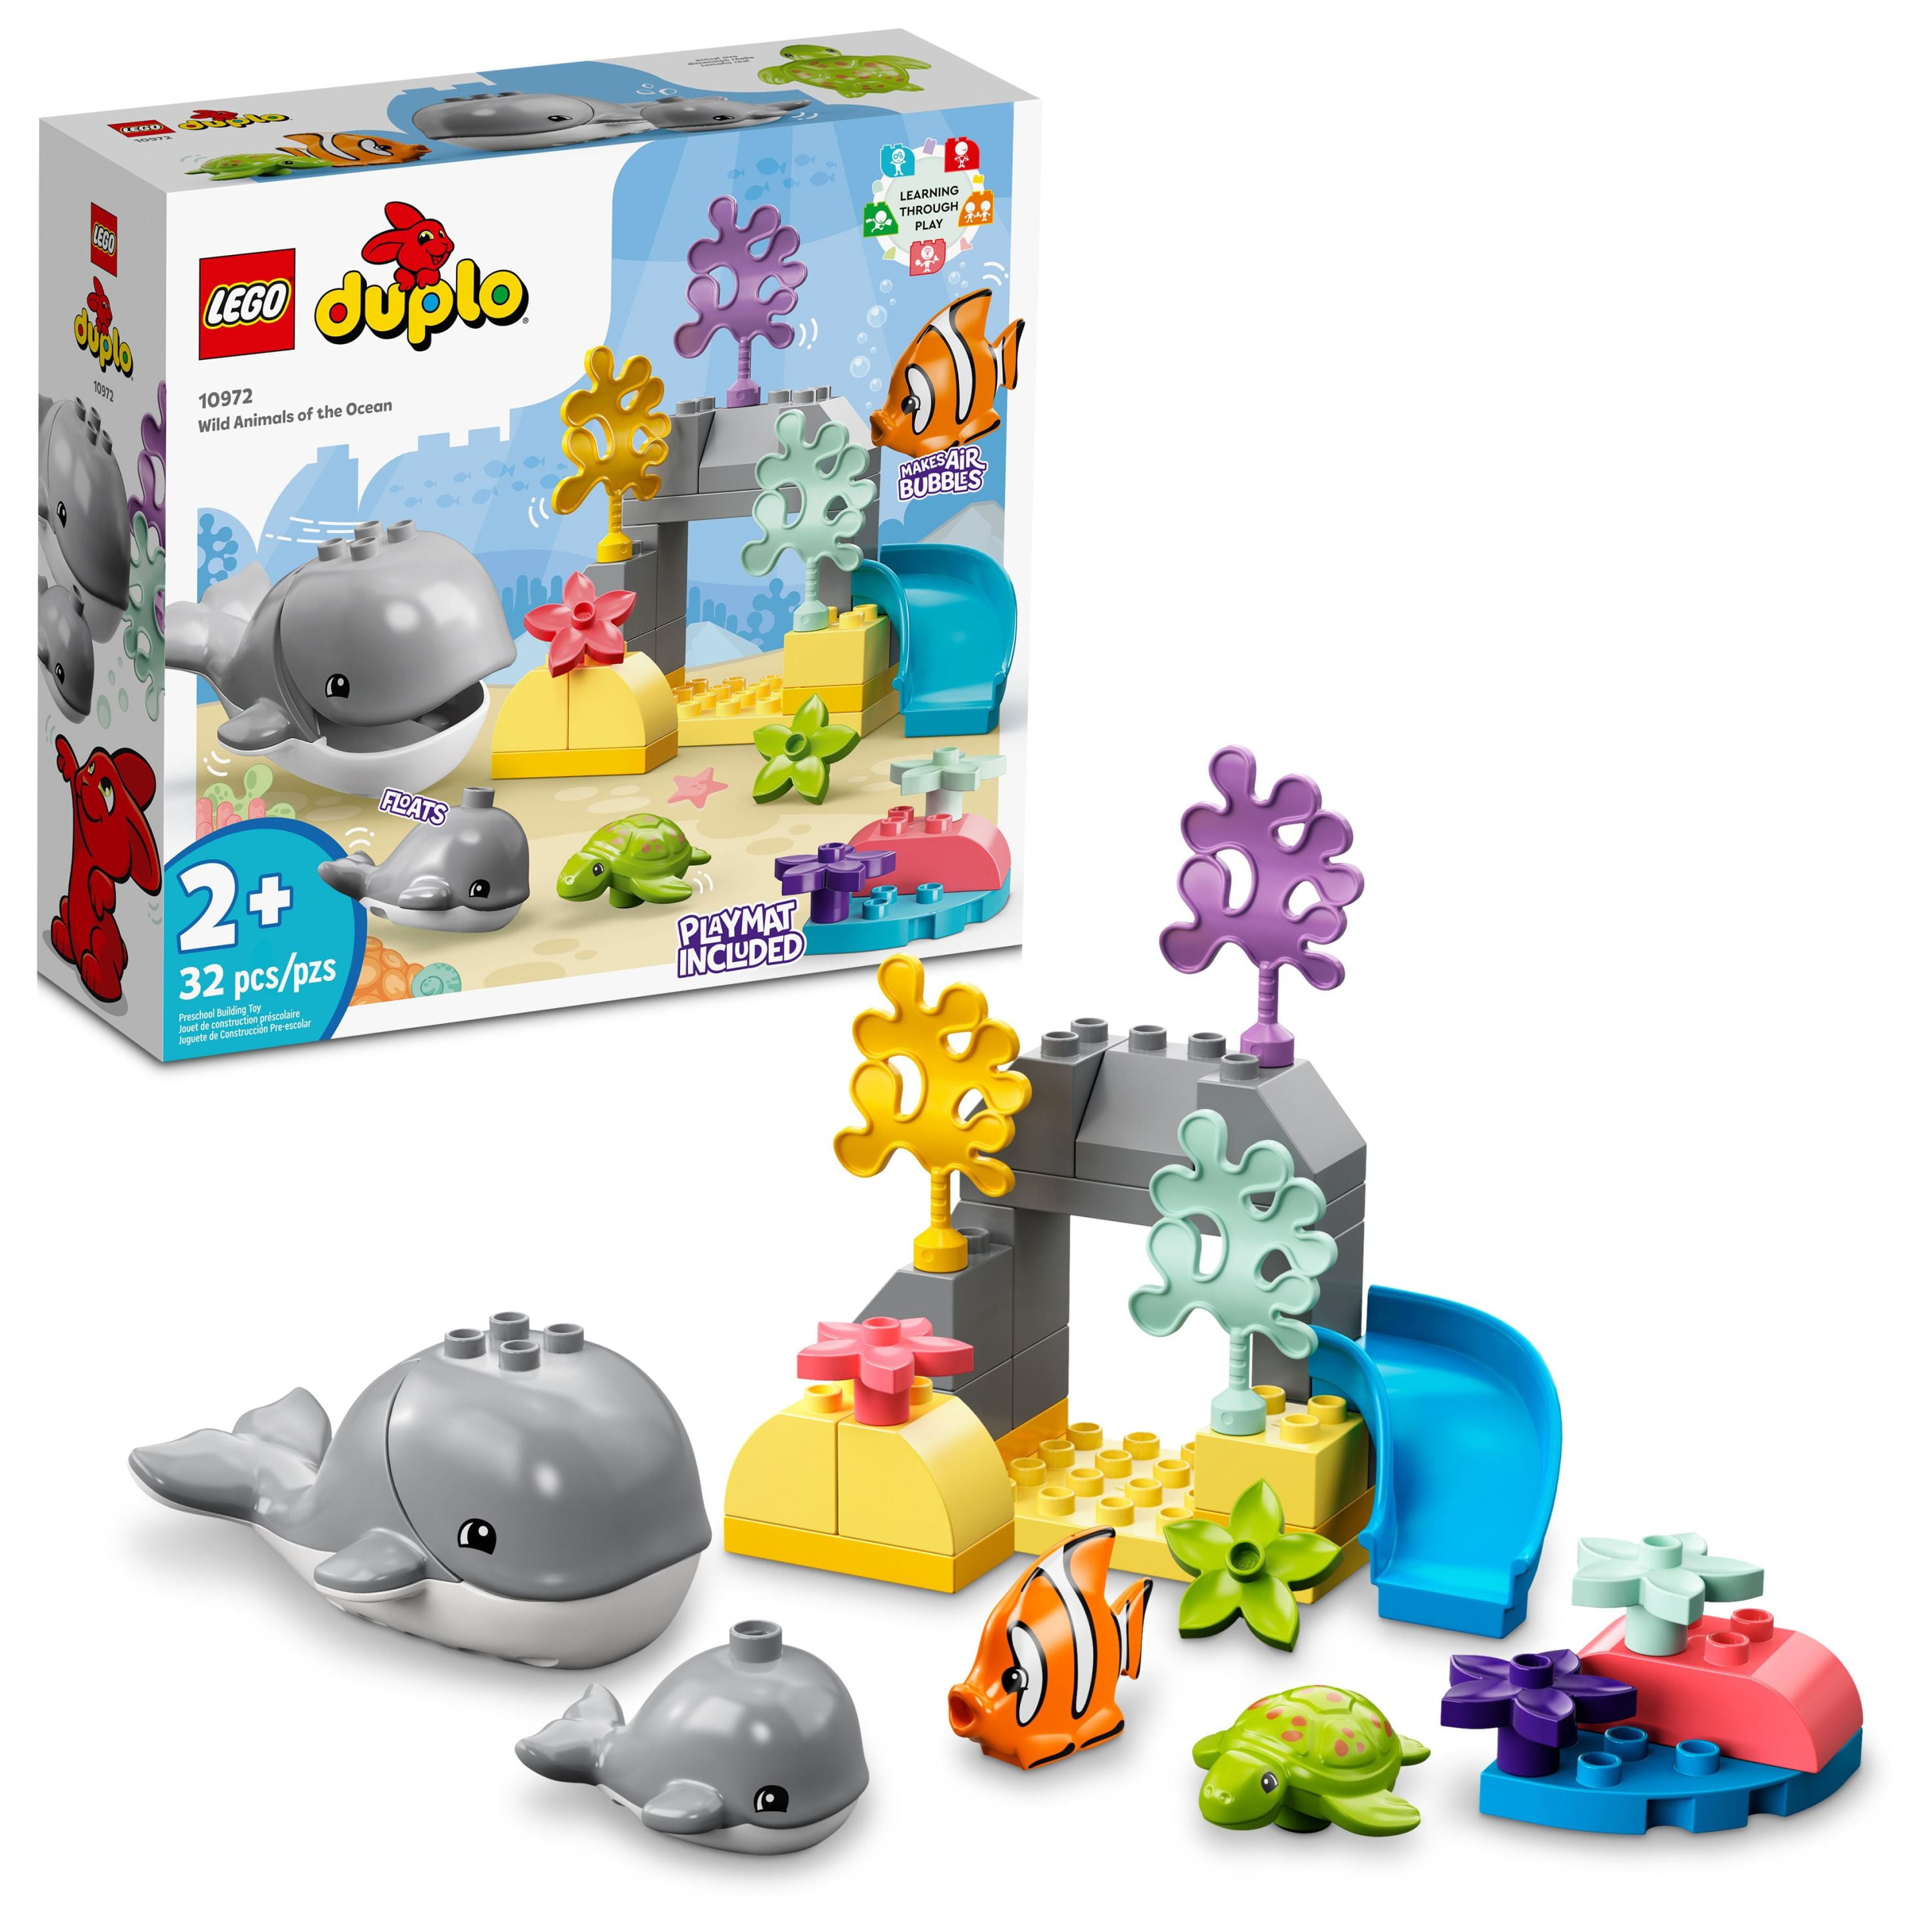 LEGO DUPLO Wild Animals of the Ocean Set 10972, with Whale and Turtle Sea Animal Figures & Playmat, Educational Toys for Kids, Easter Colors, Great Easter Basket Stuffer for Toddlers 2 Plus Years Old